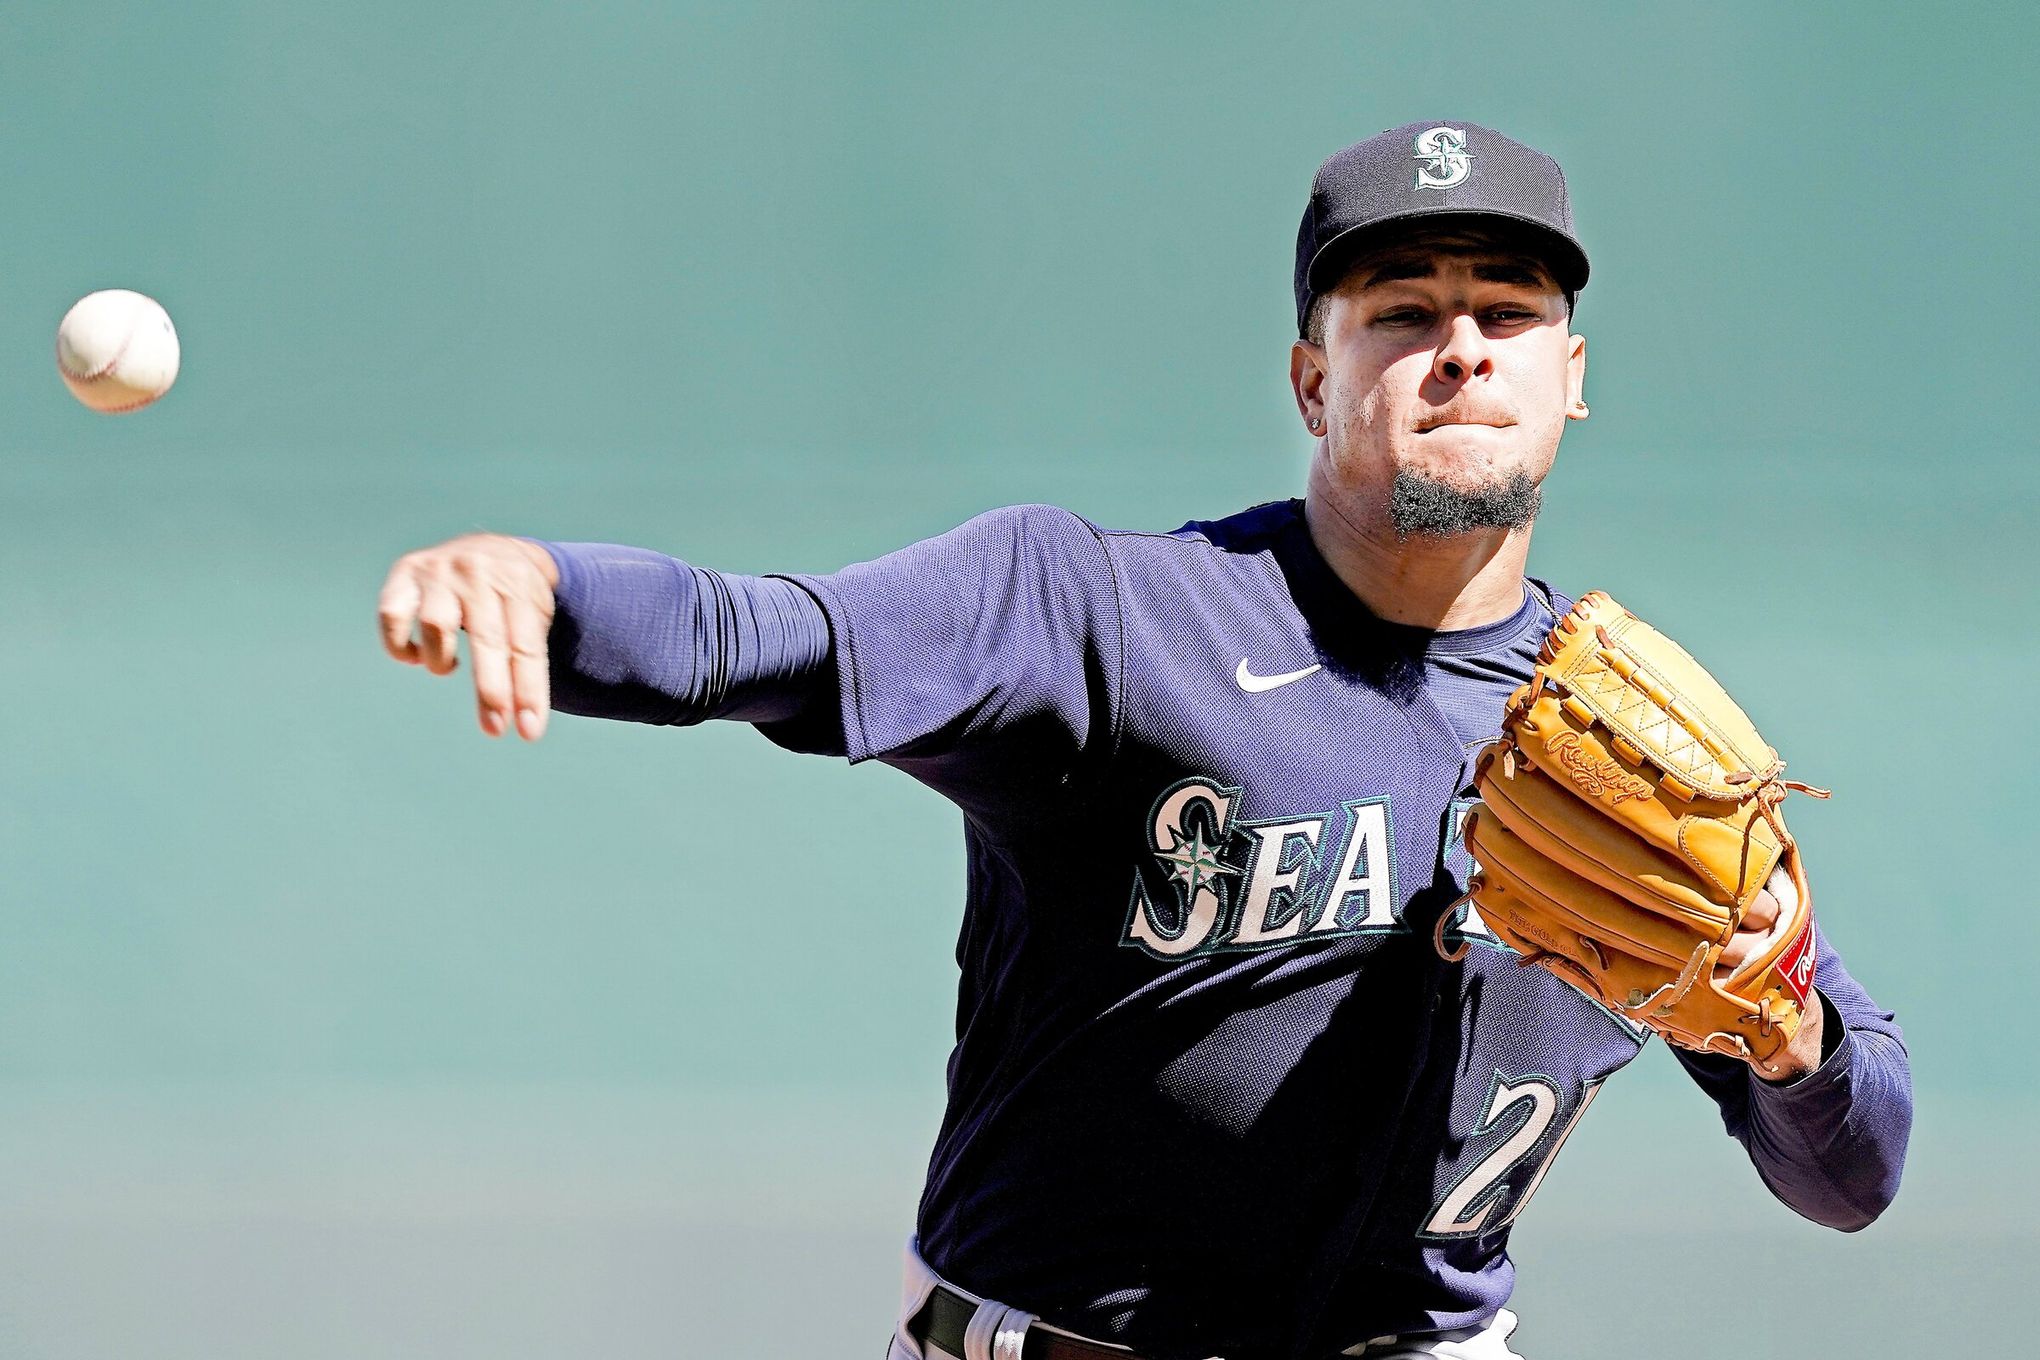 Luis Castillo to make Mariners debut against Yankees